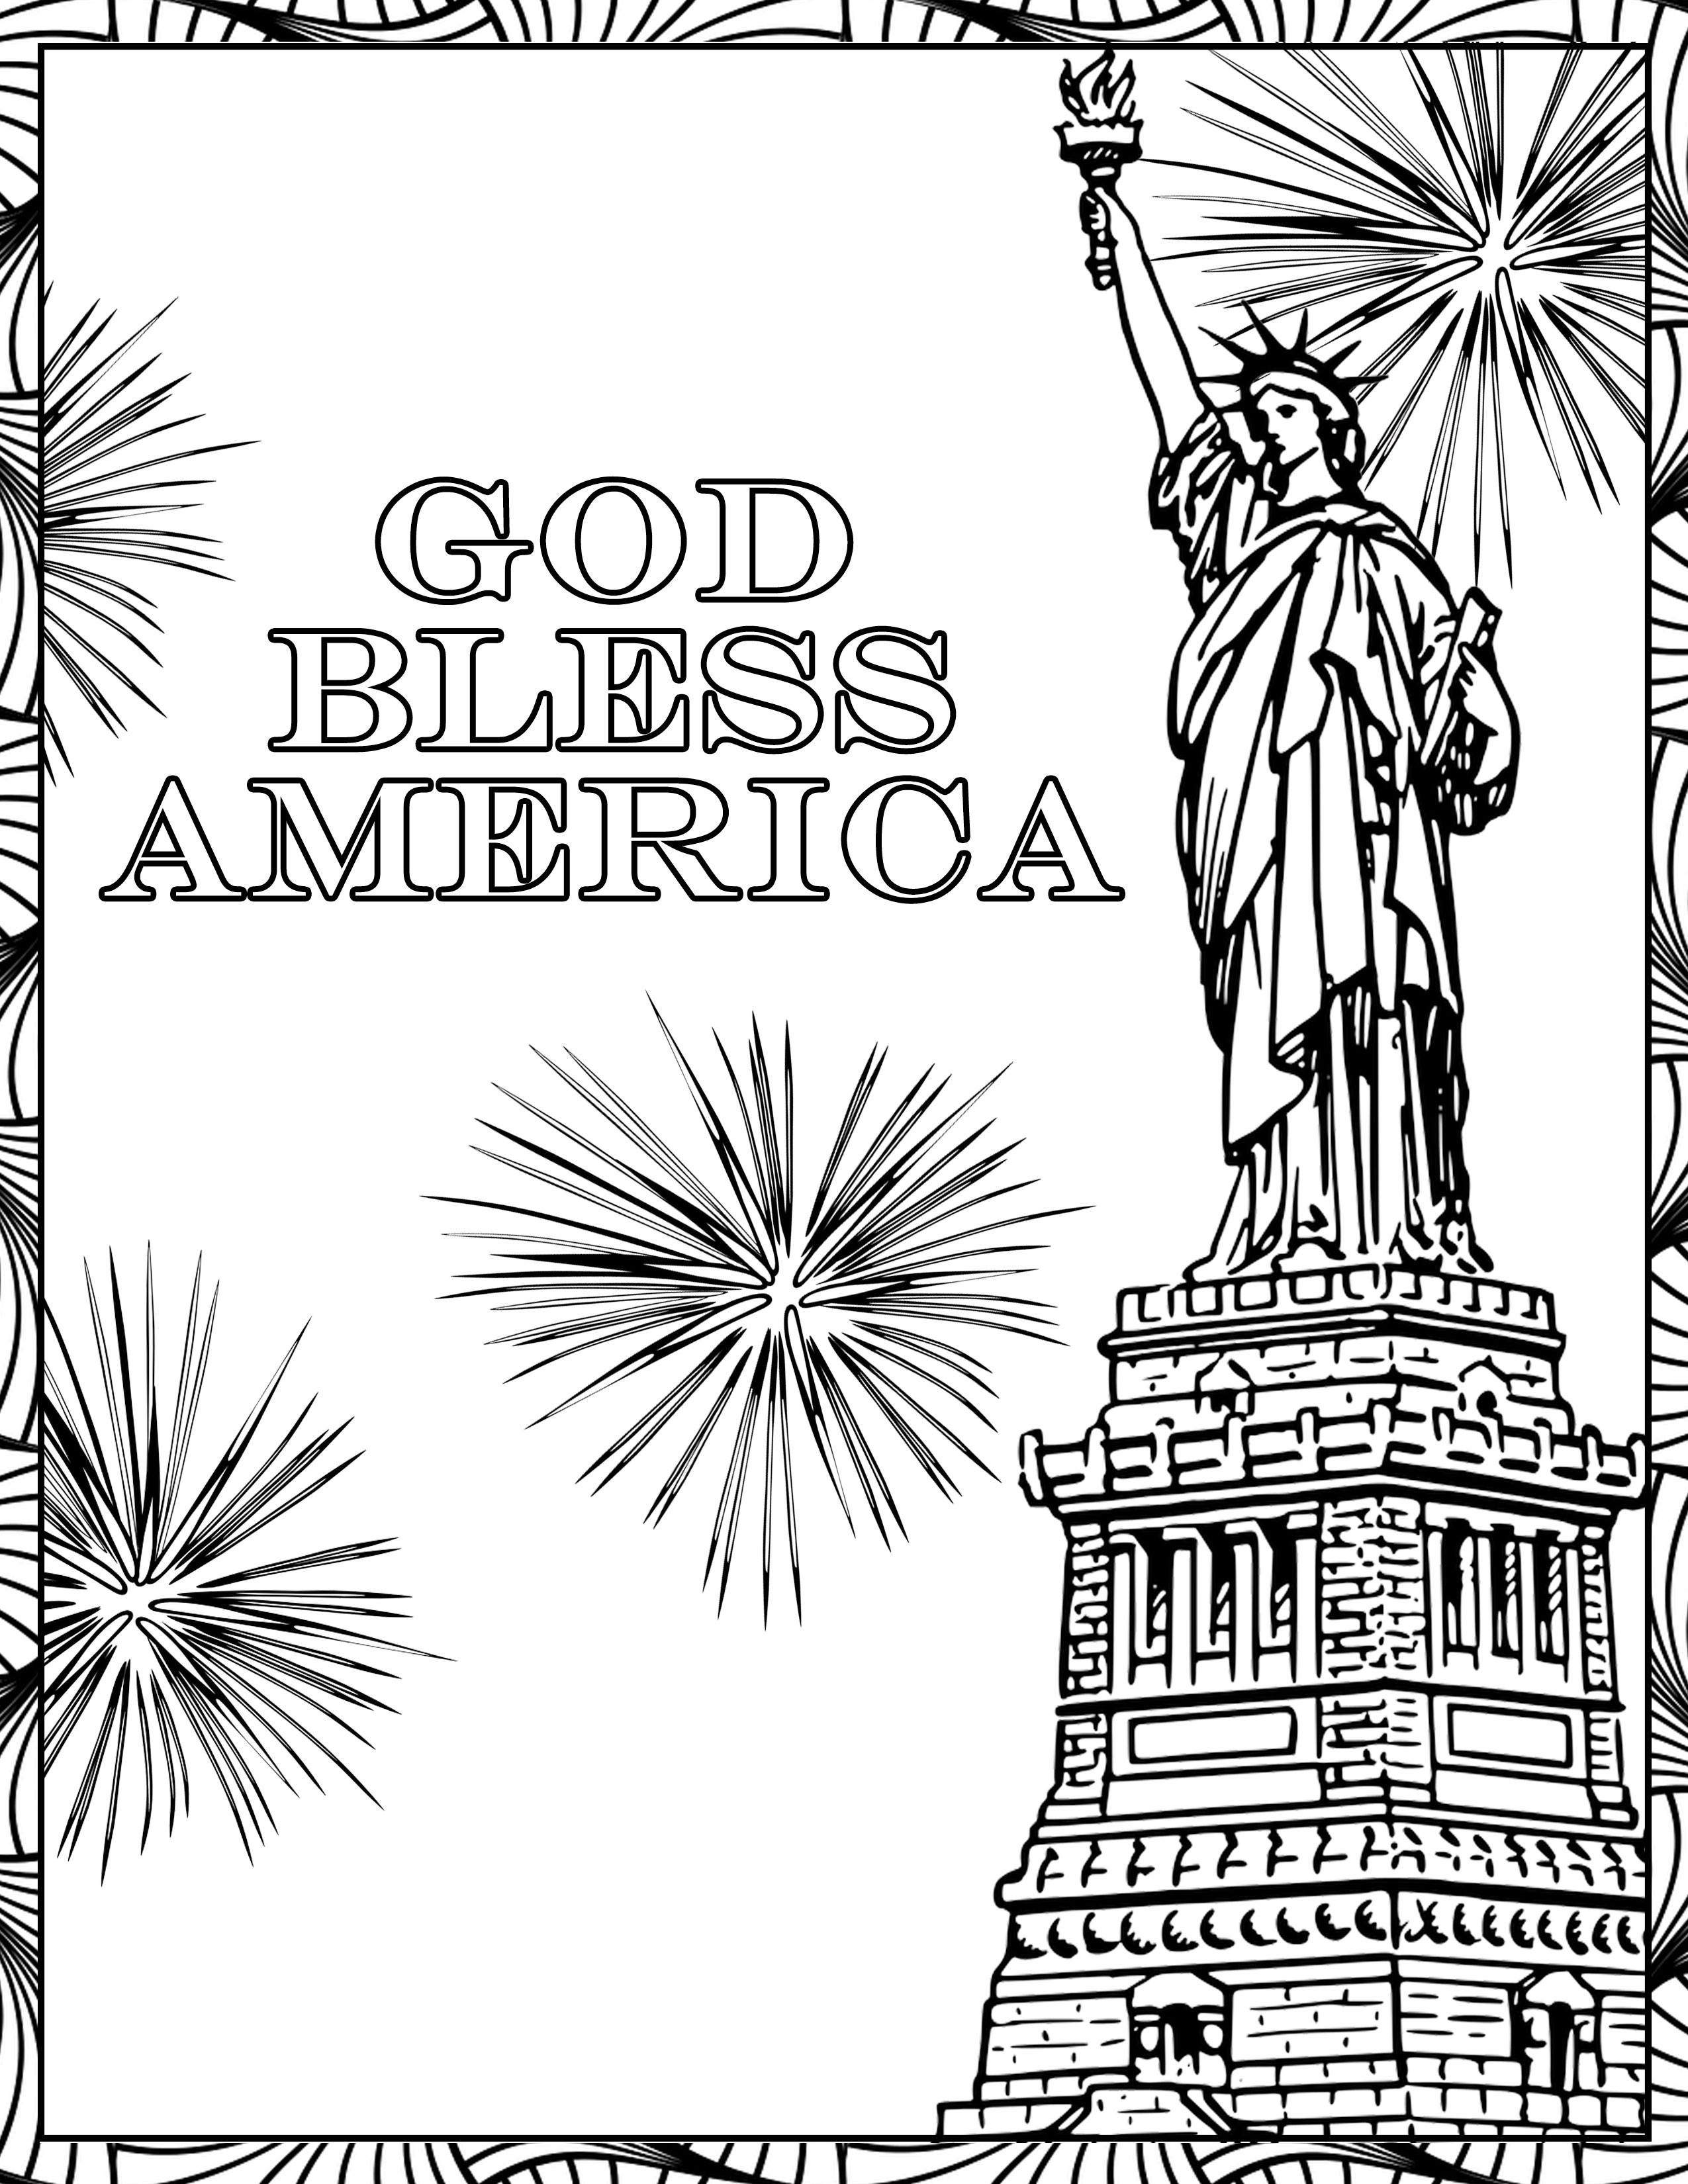 Download July 4th Coloring Pages - Christianbook.com Blog